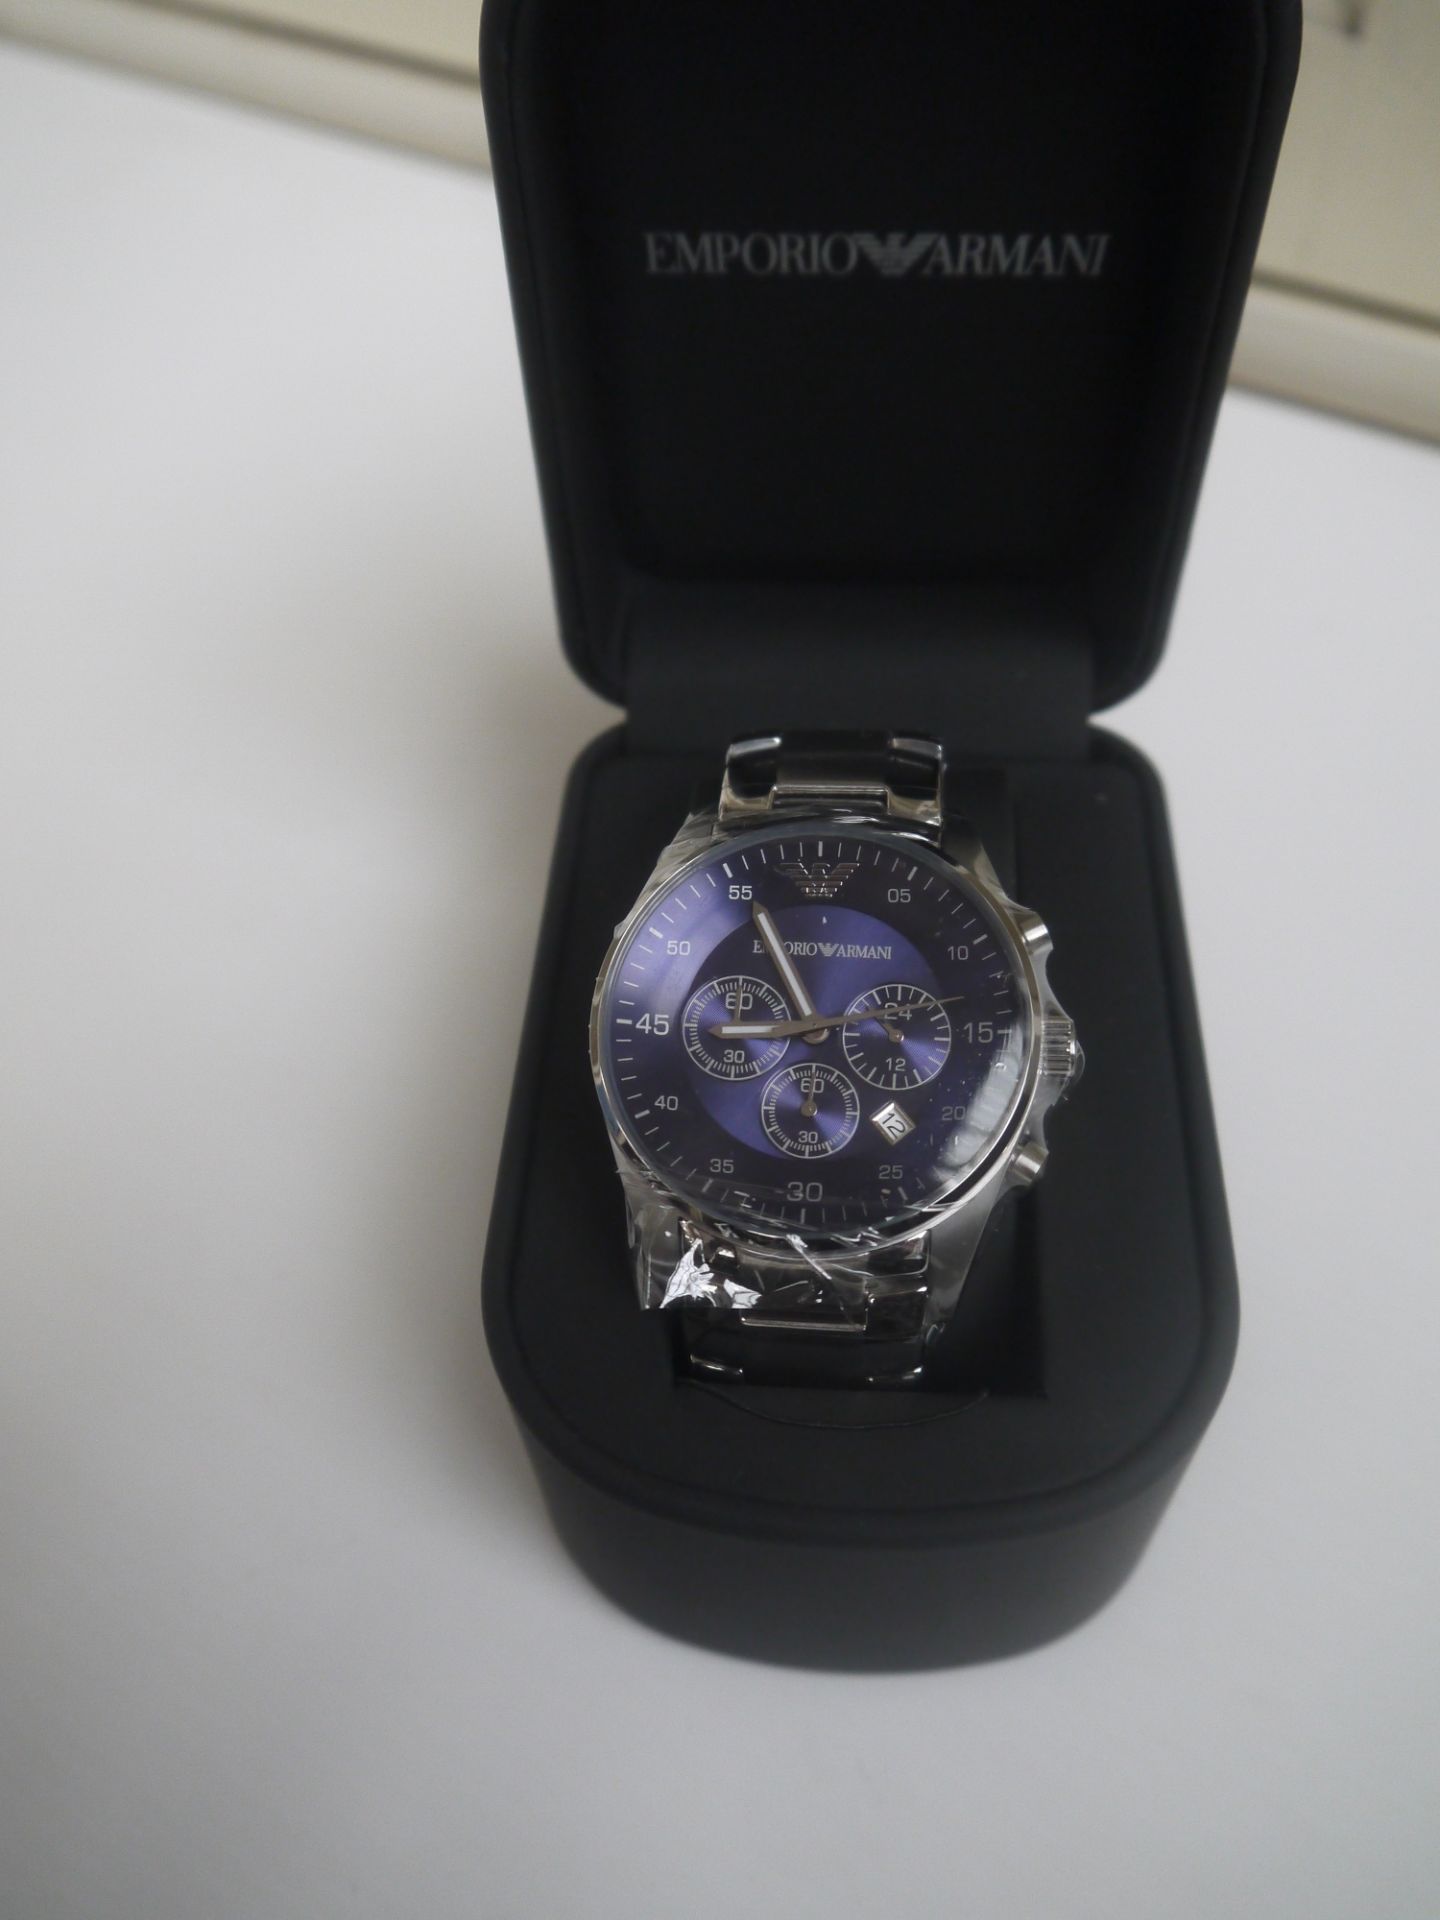 NO VAT!! Armani AR5860 blue Face Chronograph Gents Watch with Metal Strap New, boxed and ticking.